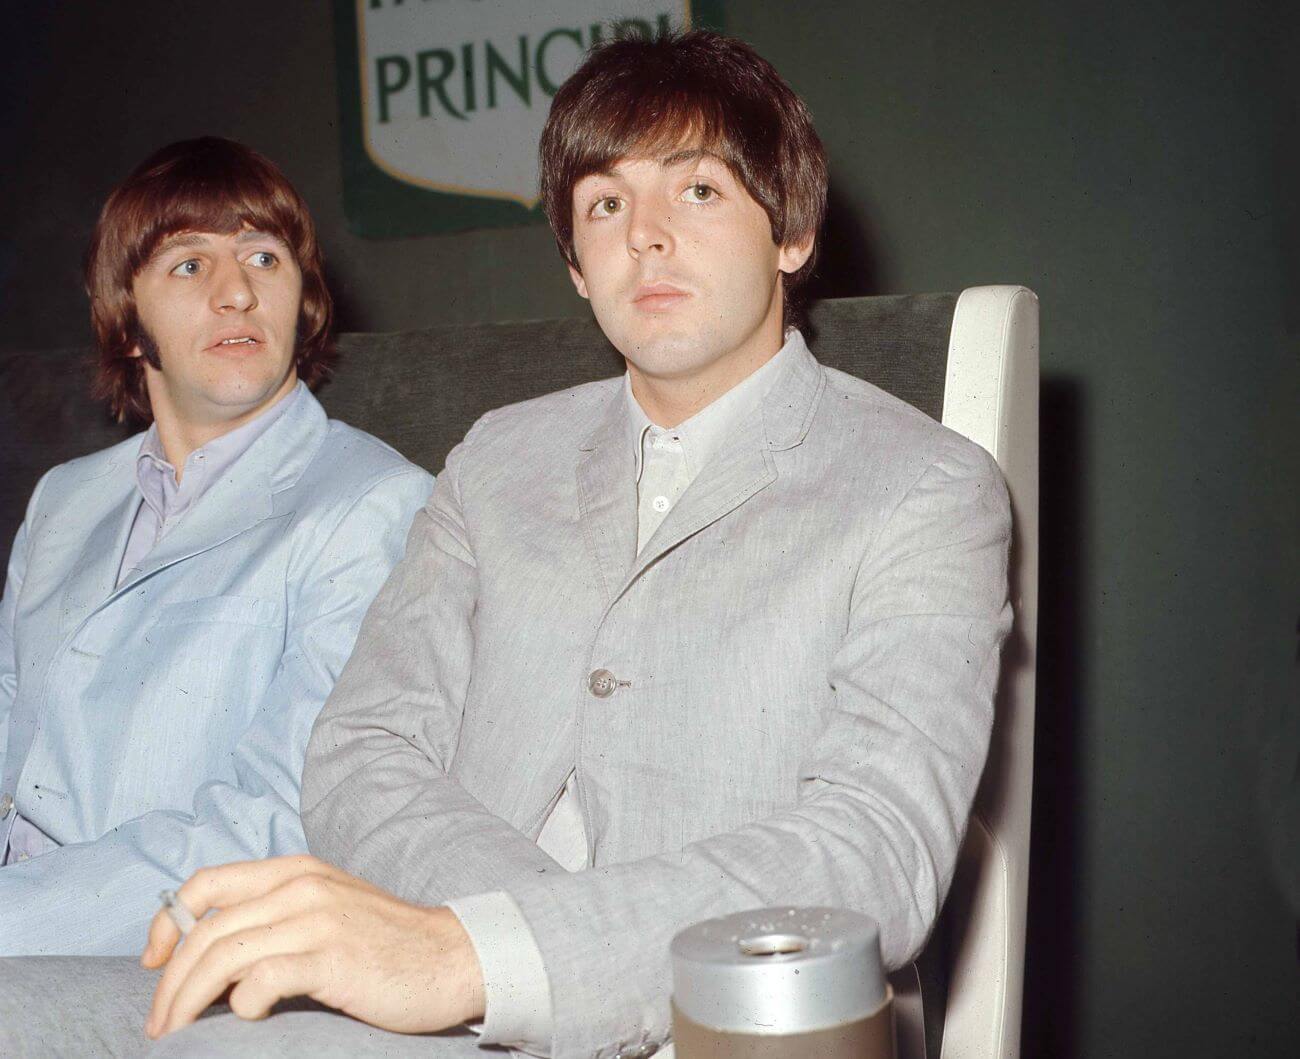 Ringo Starr and Paul McCartney sit next to each other at a table.